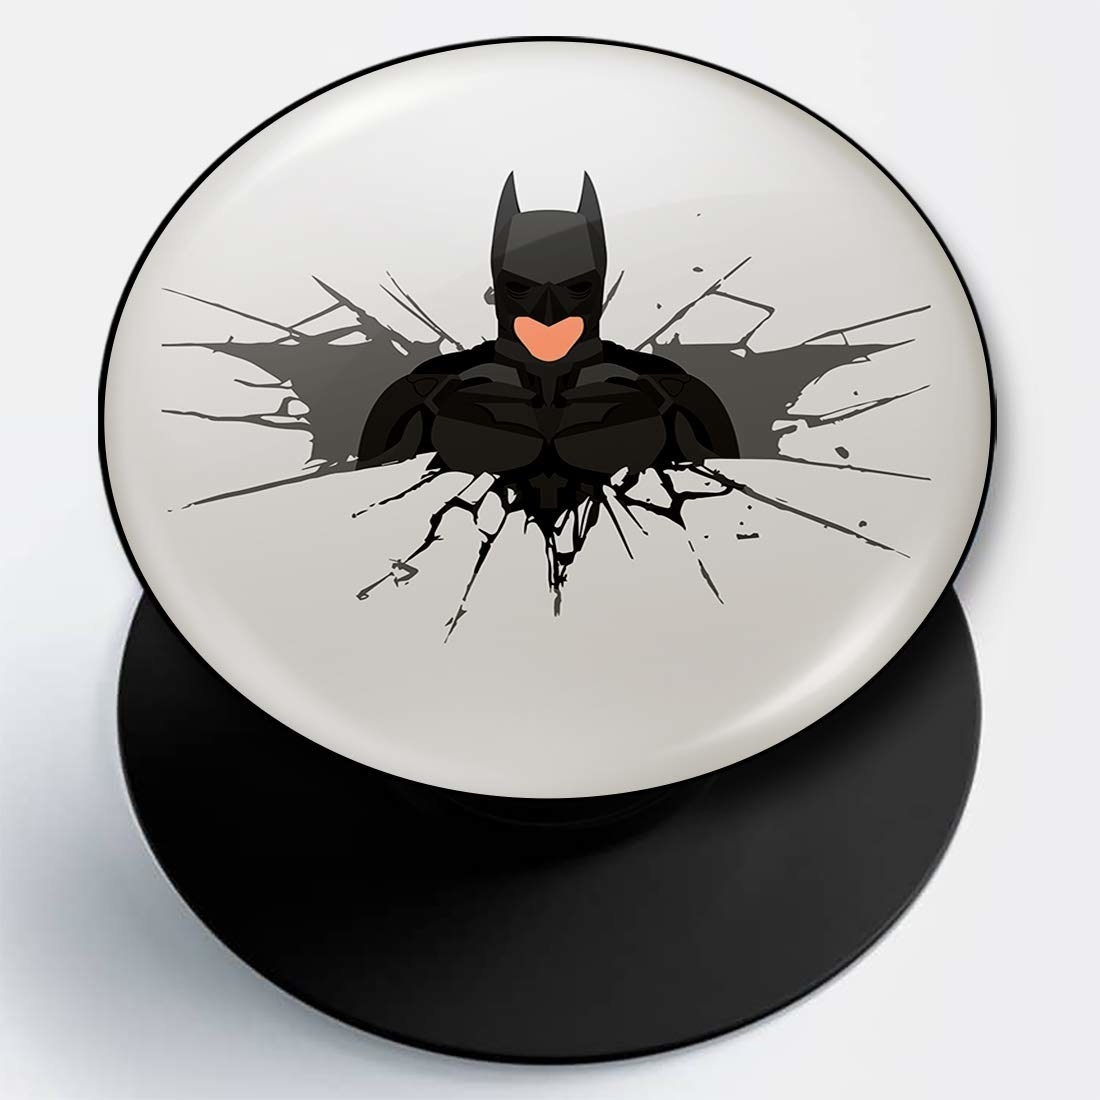 16 Super Cool Popsockets For Every Sort Of Personality